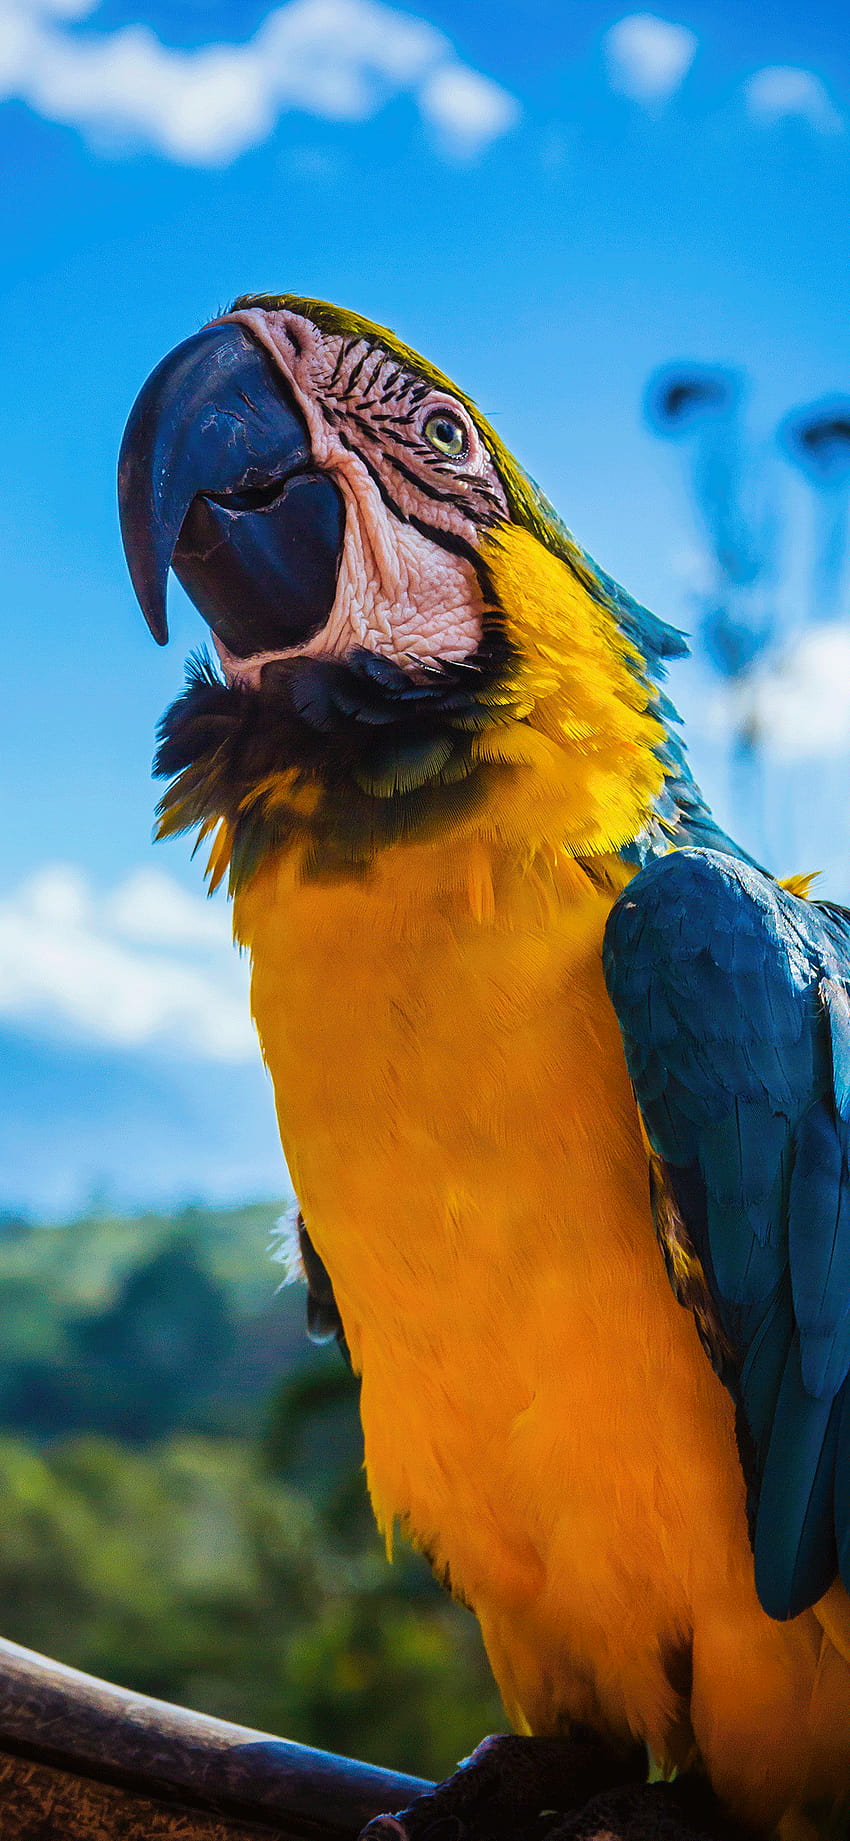 Parrot for iPhone 11, Pro Max, X, 8, 7, 6, parrot iphone HD phone wallpaper